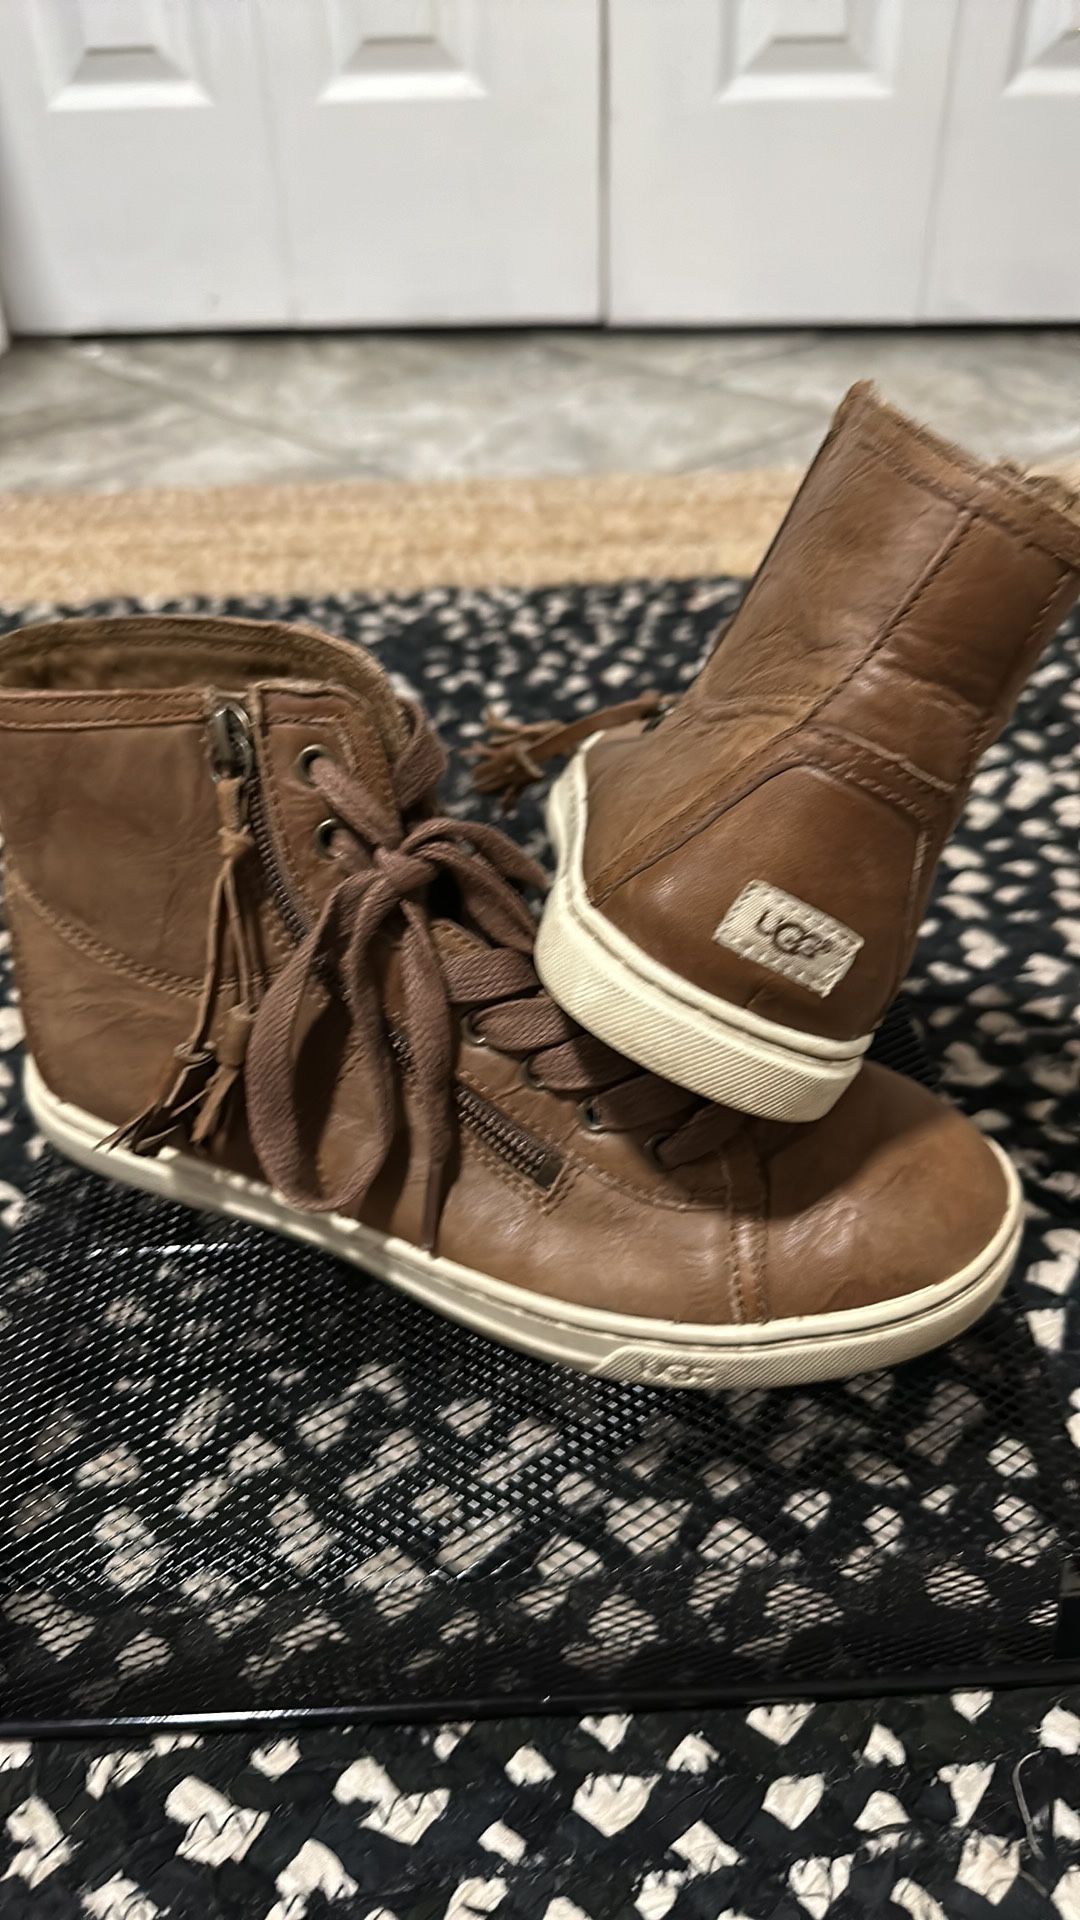 Ugg Ankle Leather Booties  💐 Size 7 Reduced 